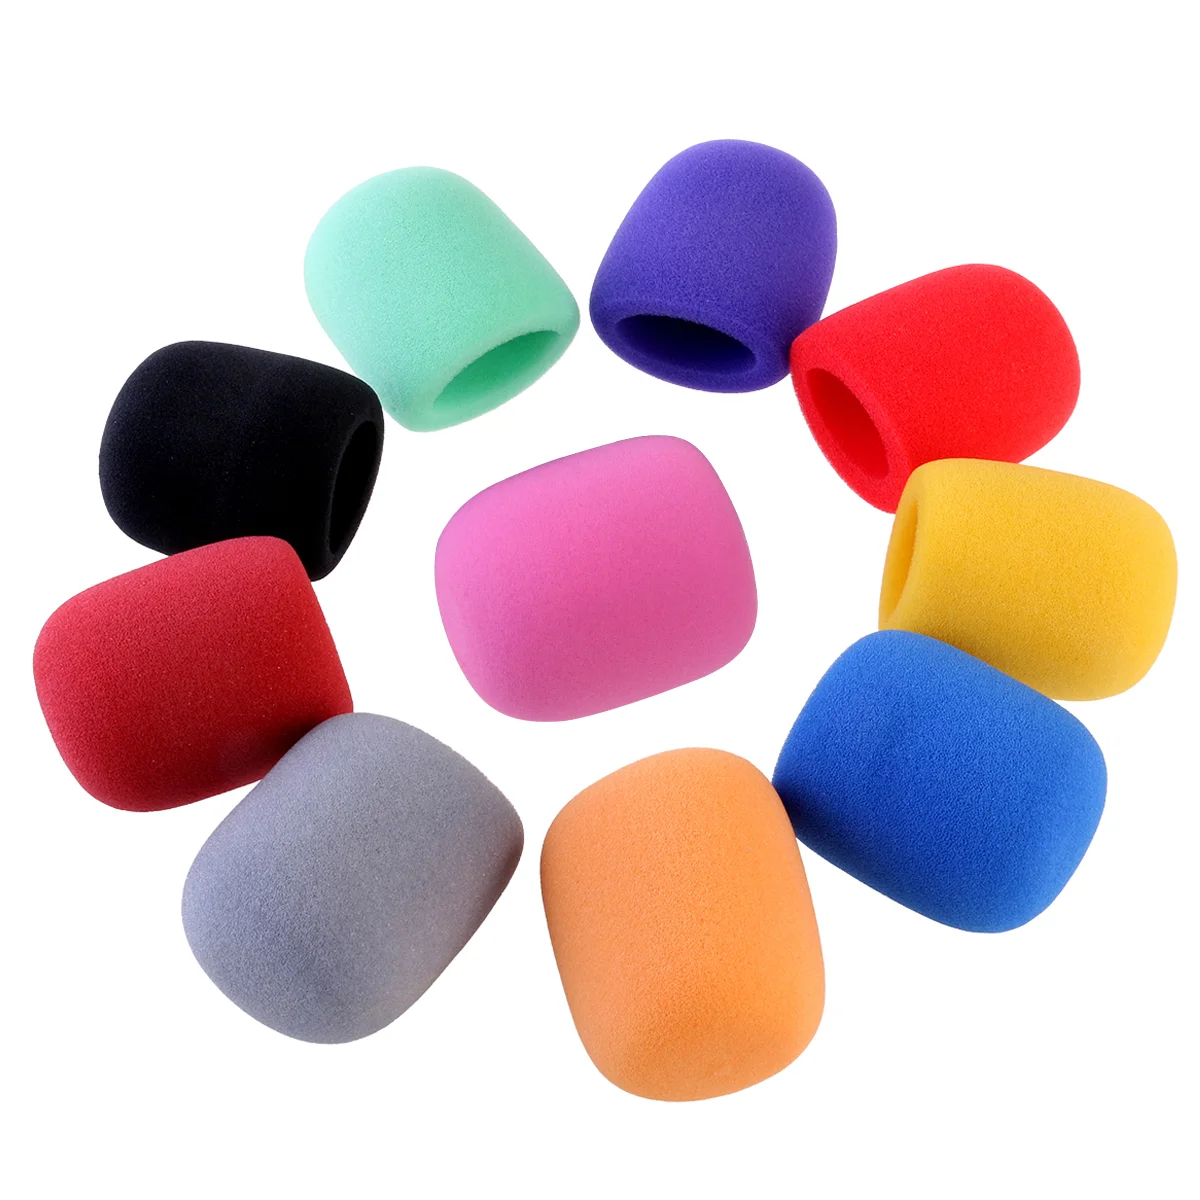 

10 Mic Covers Colorful Handheld Microphone Windscreen Reusable Microphone Cover for KTV Device Performance ( )